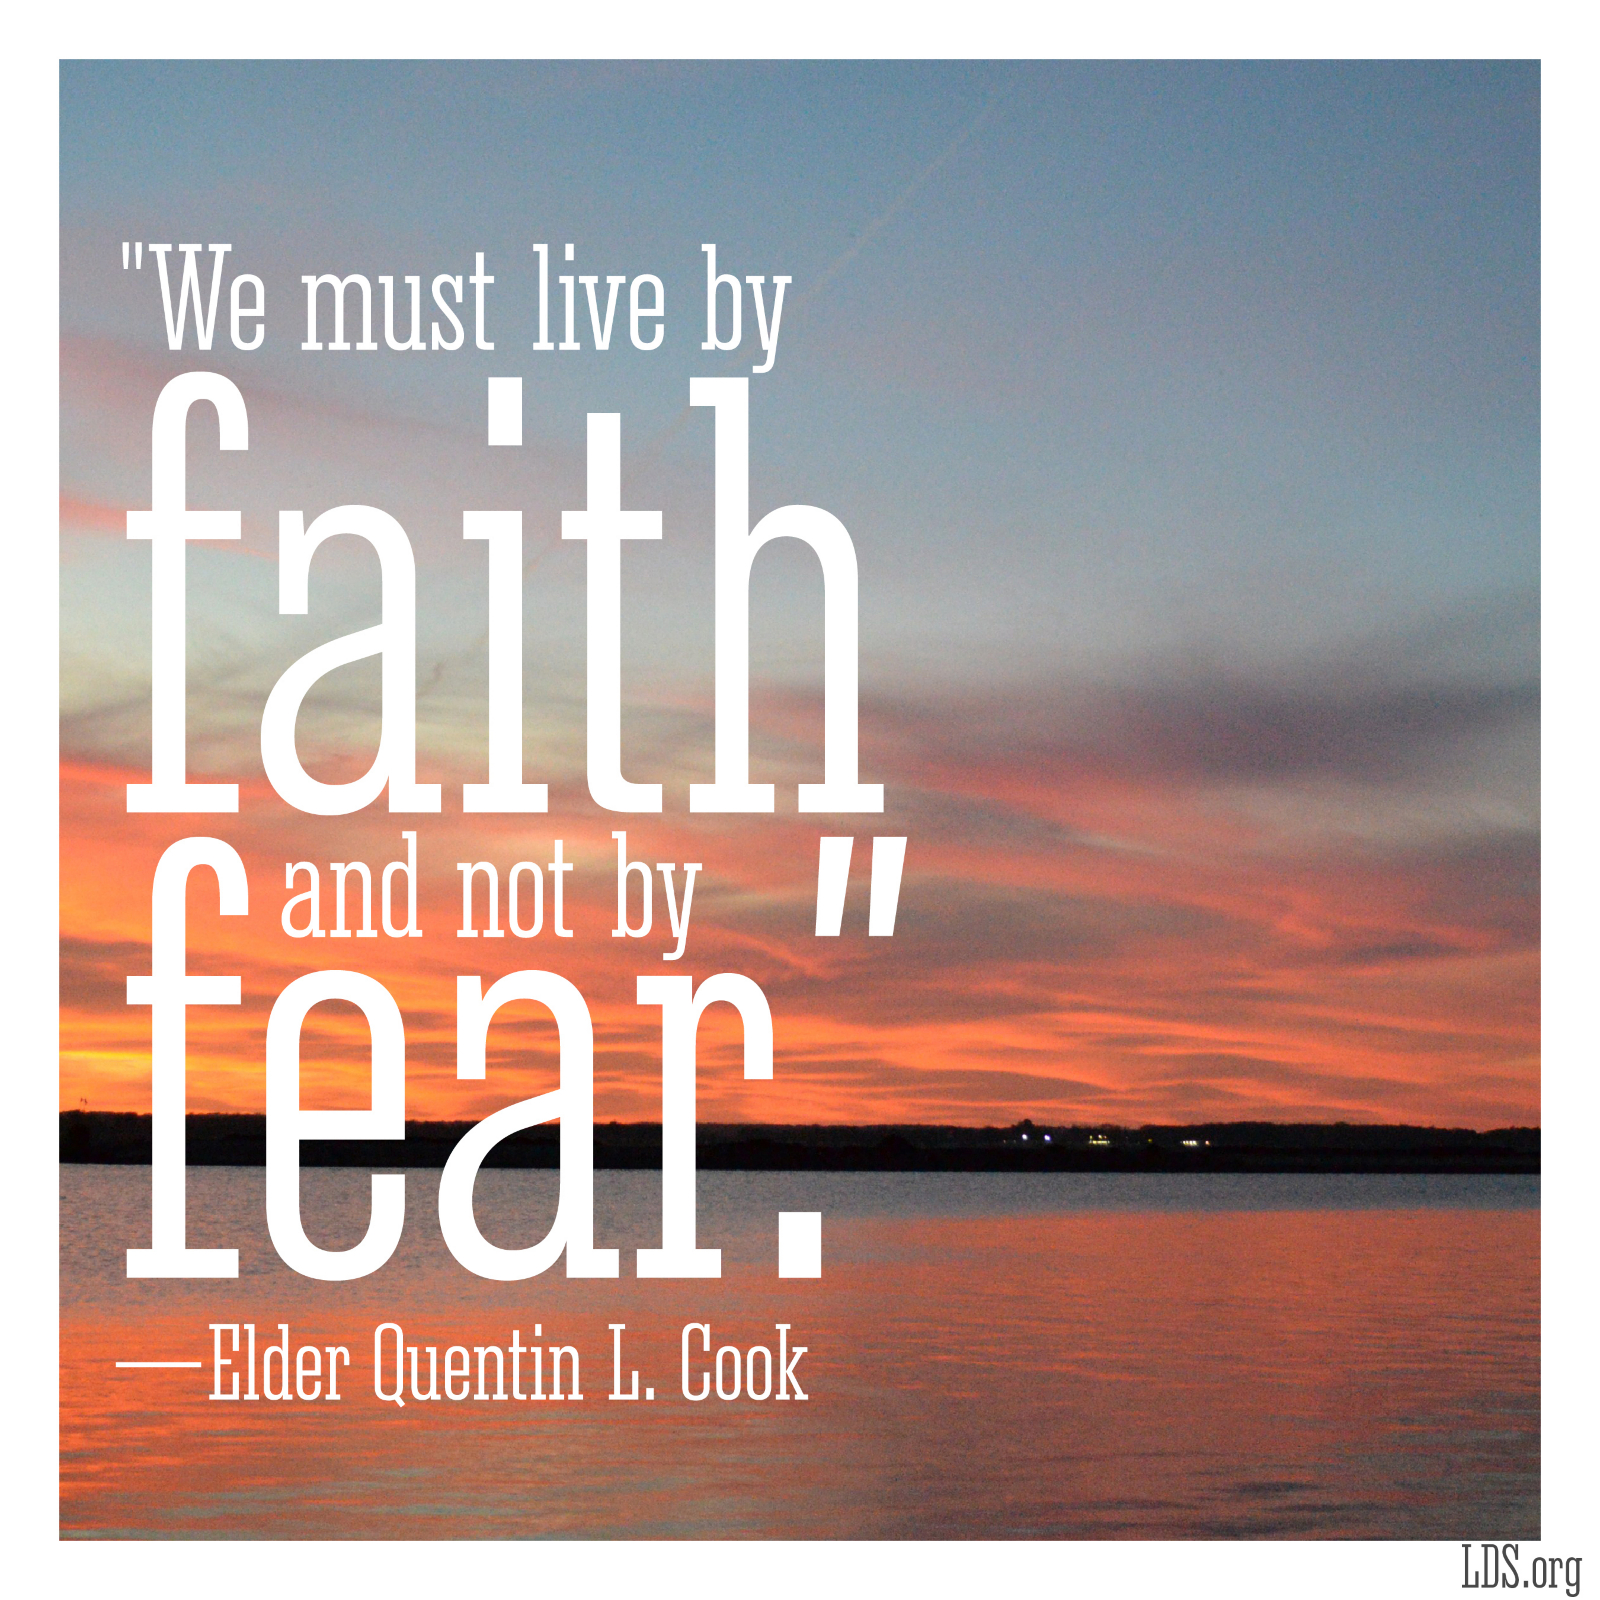 we must live by faith and notby fear. elder quentin l. cook